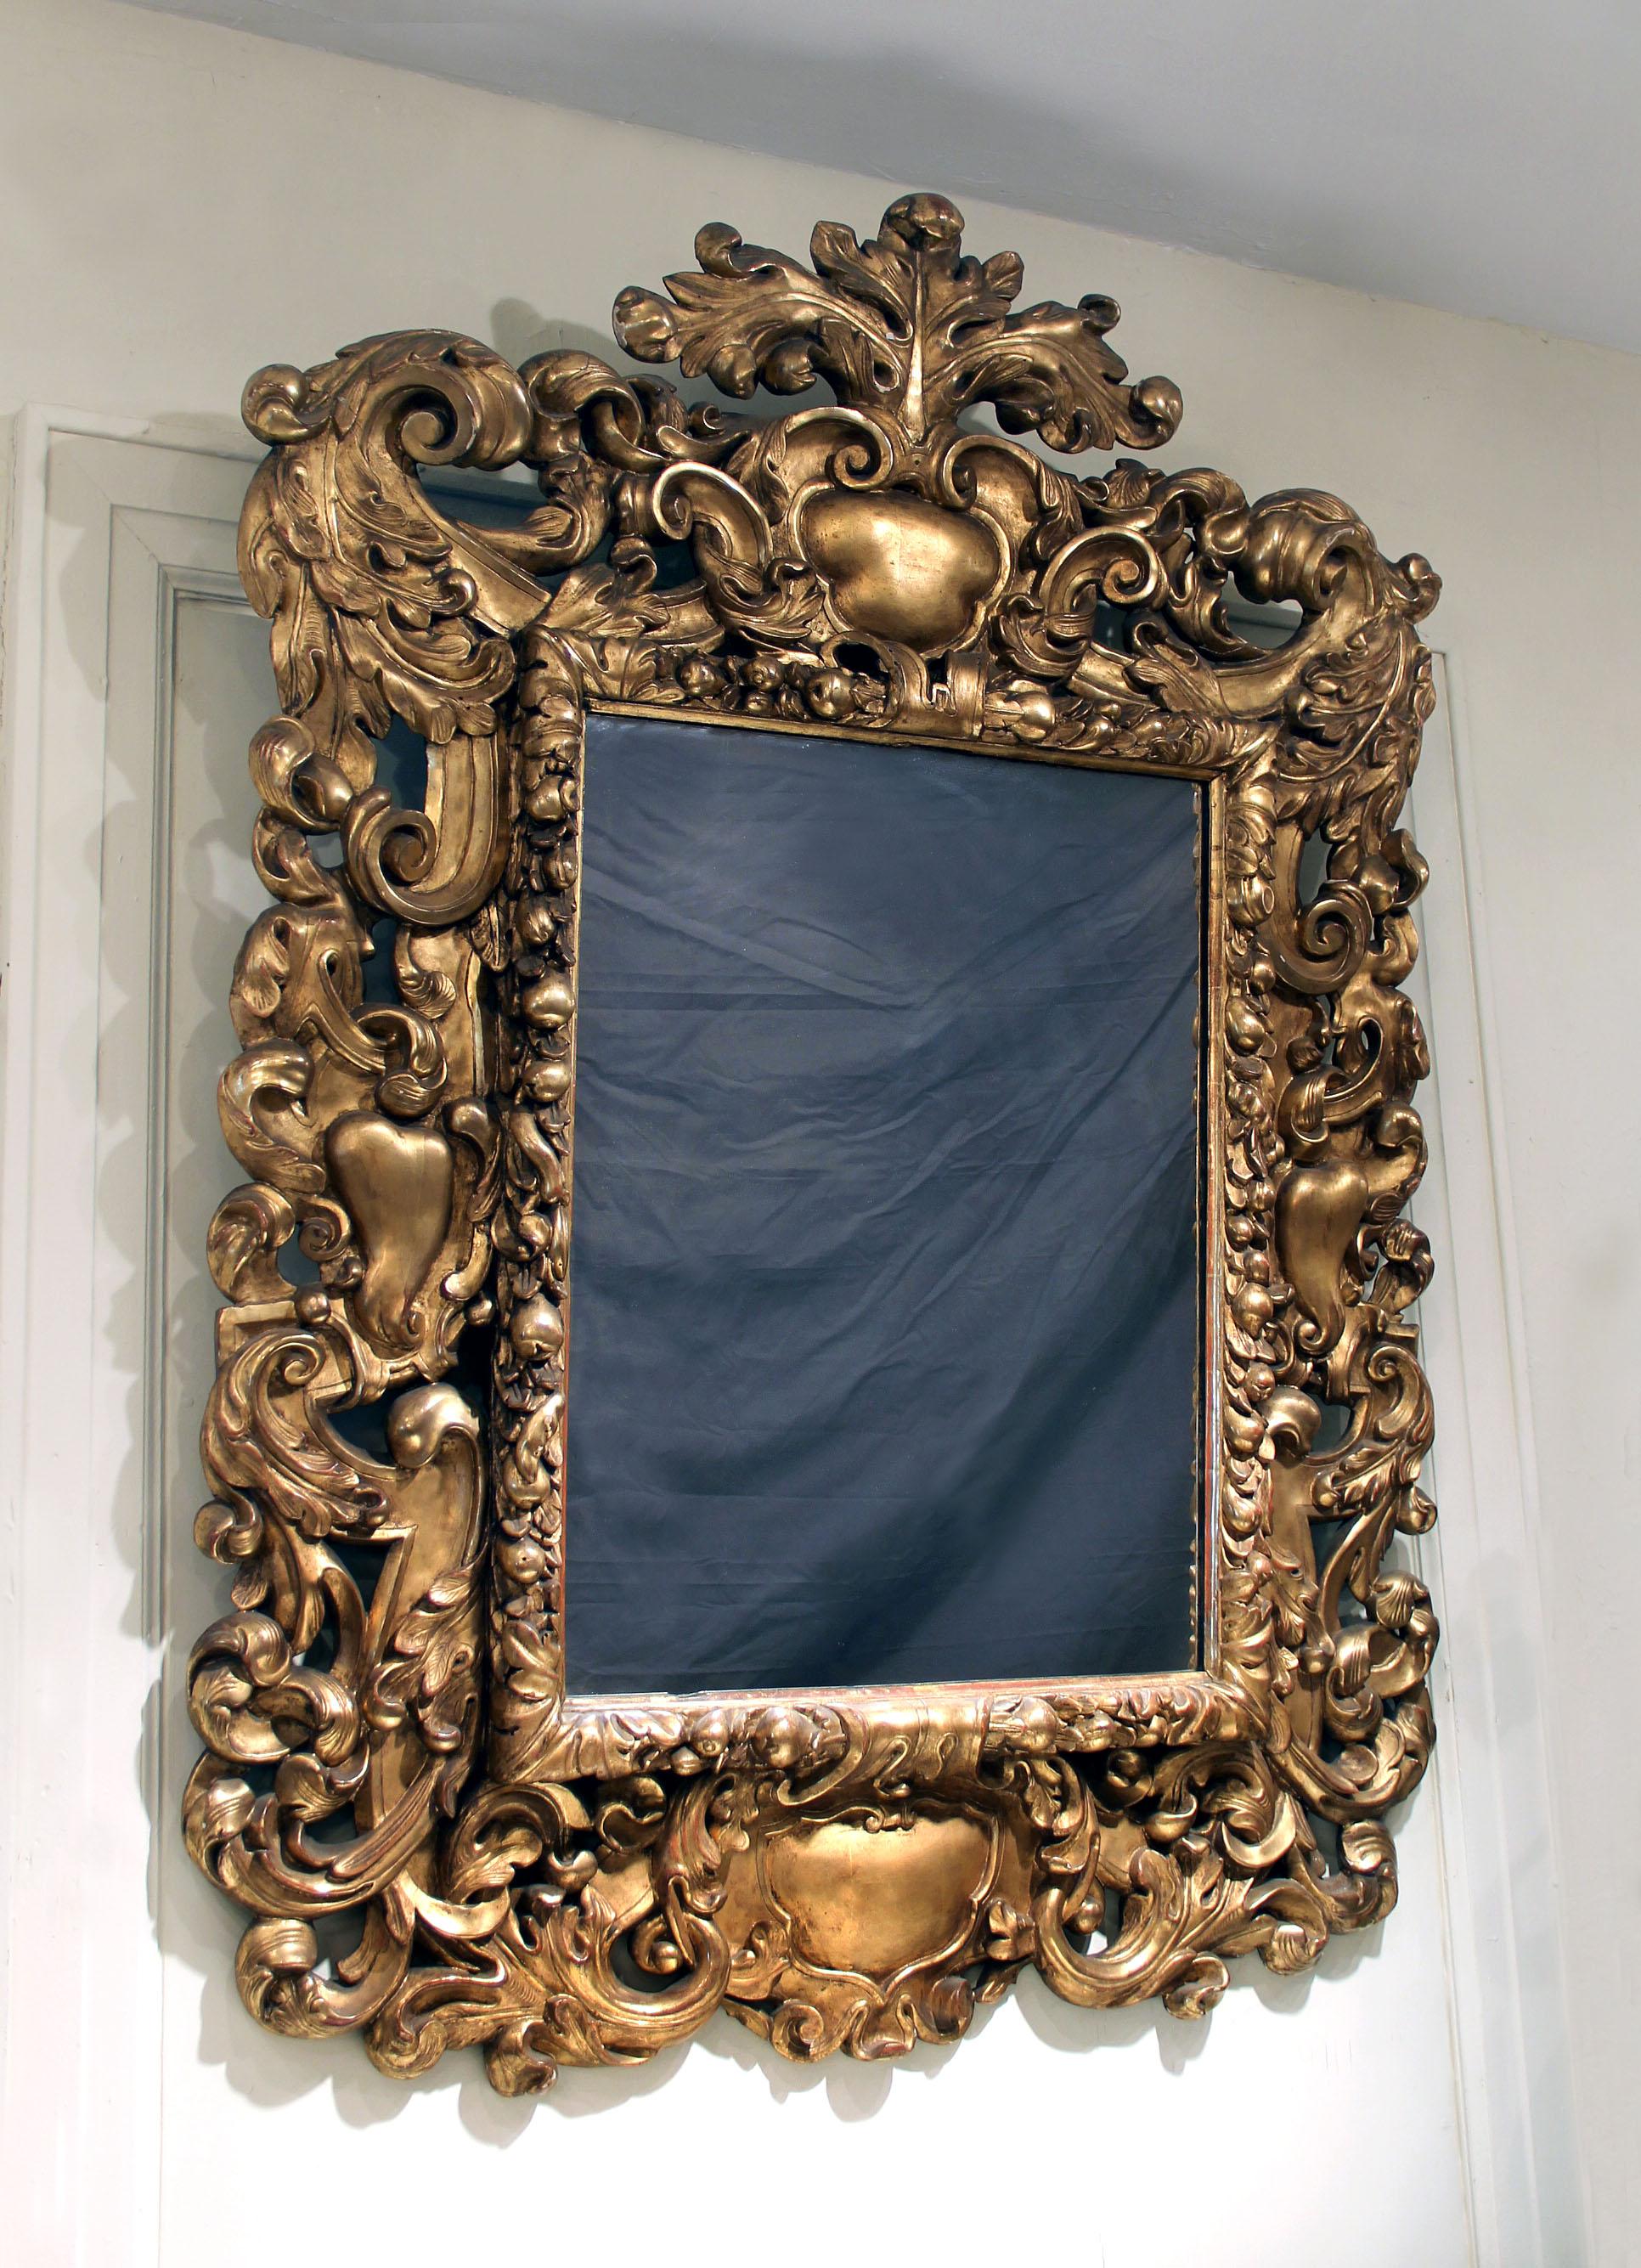 An Impressive Late 19th Century Carved Giltwood Rococo Style Mirror

The large and wonderfully carved rectangular mirror surrounded with sprawling acanthus leaves, the inset part of the frame with carved fruits and flowers, the central top designed